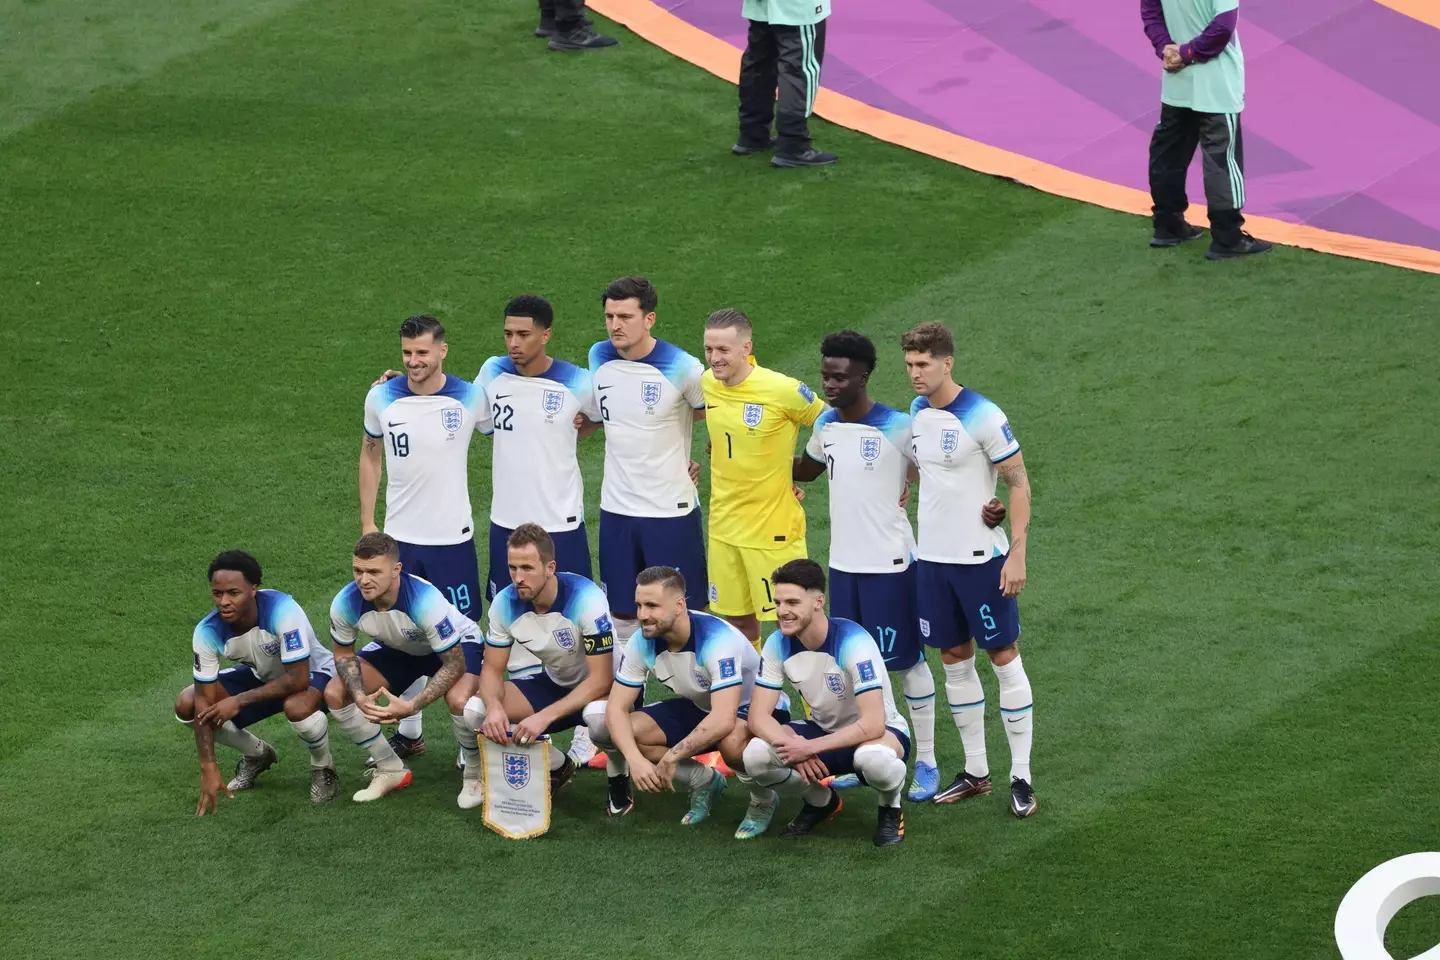 England have bowed out of the World Cup, but one pundit has had some harsh words about the referee.